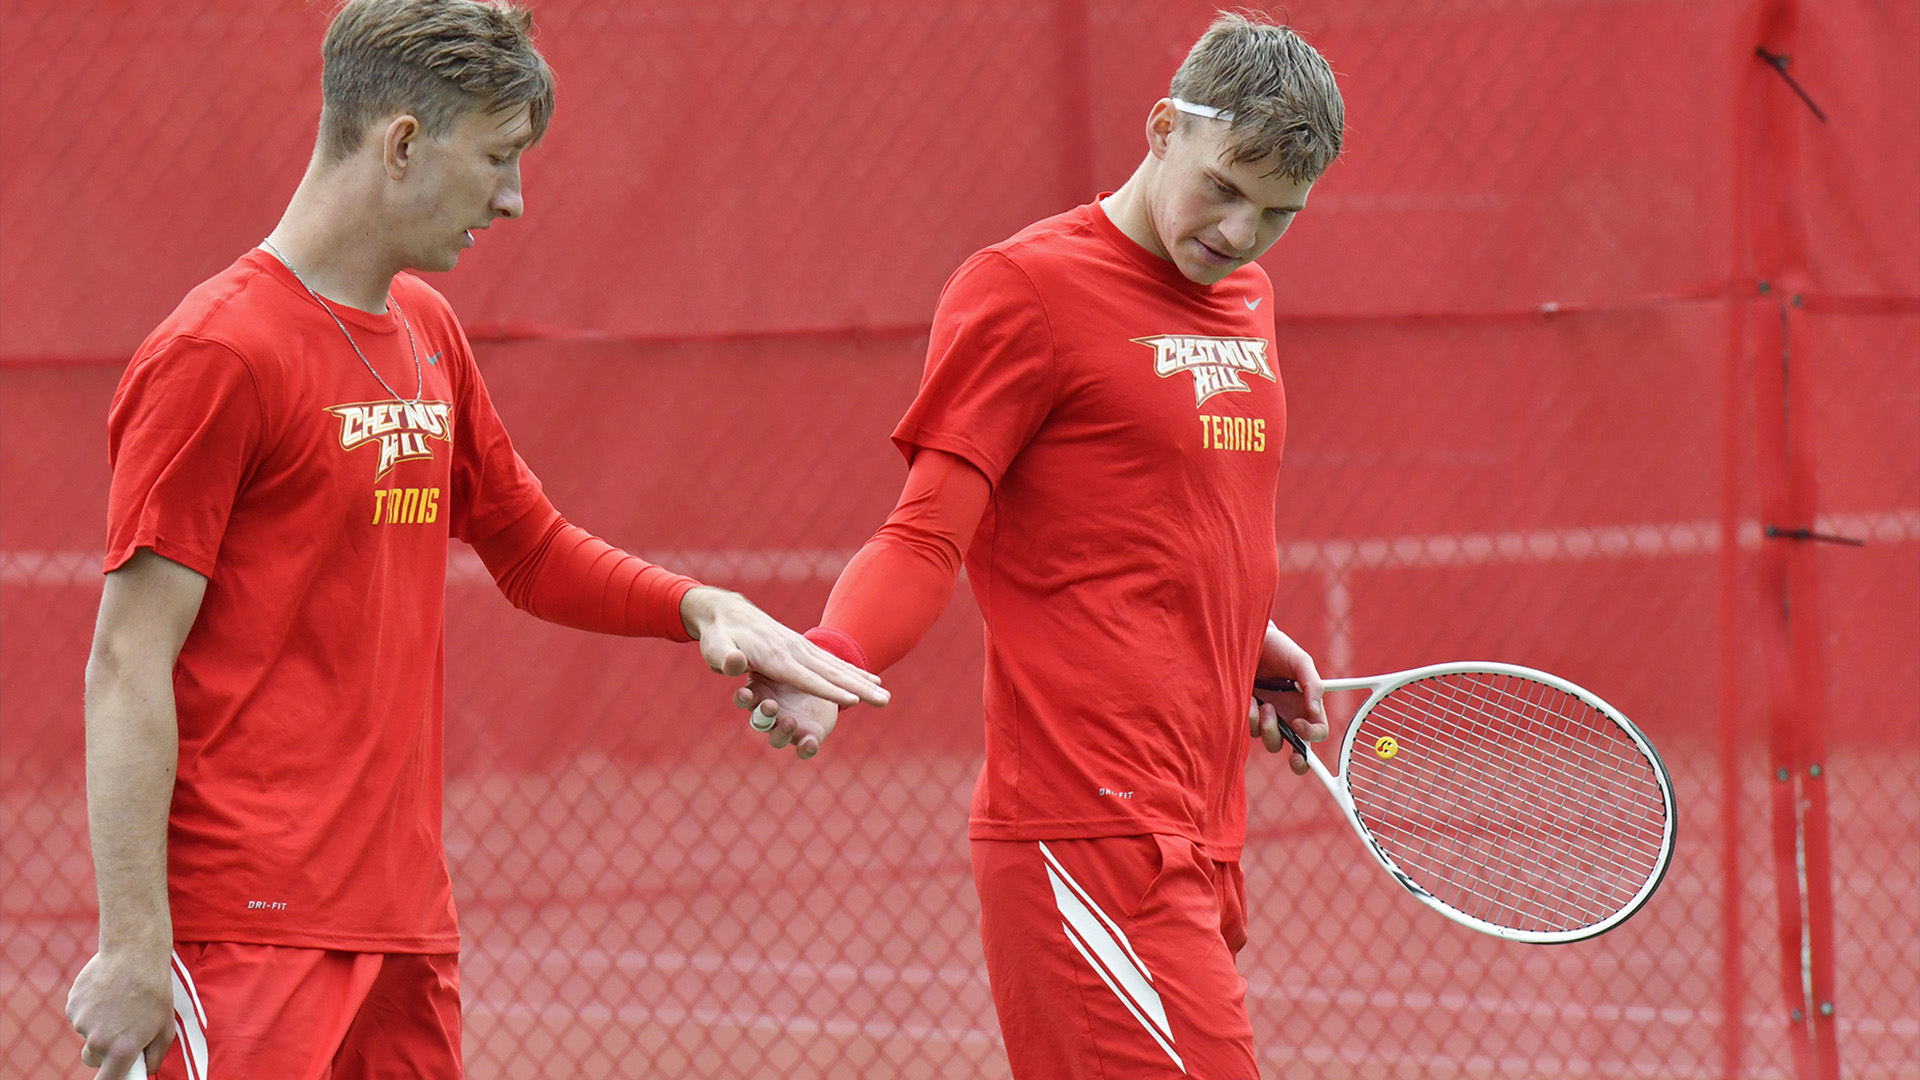 CHC Rallies for 4-3 Win over Post in CACC MTEN 1st Round